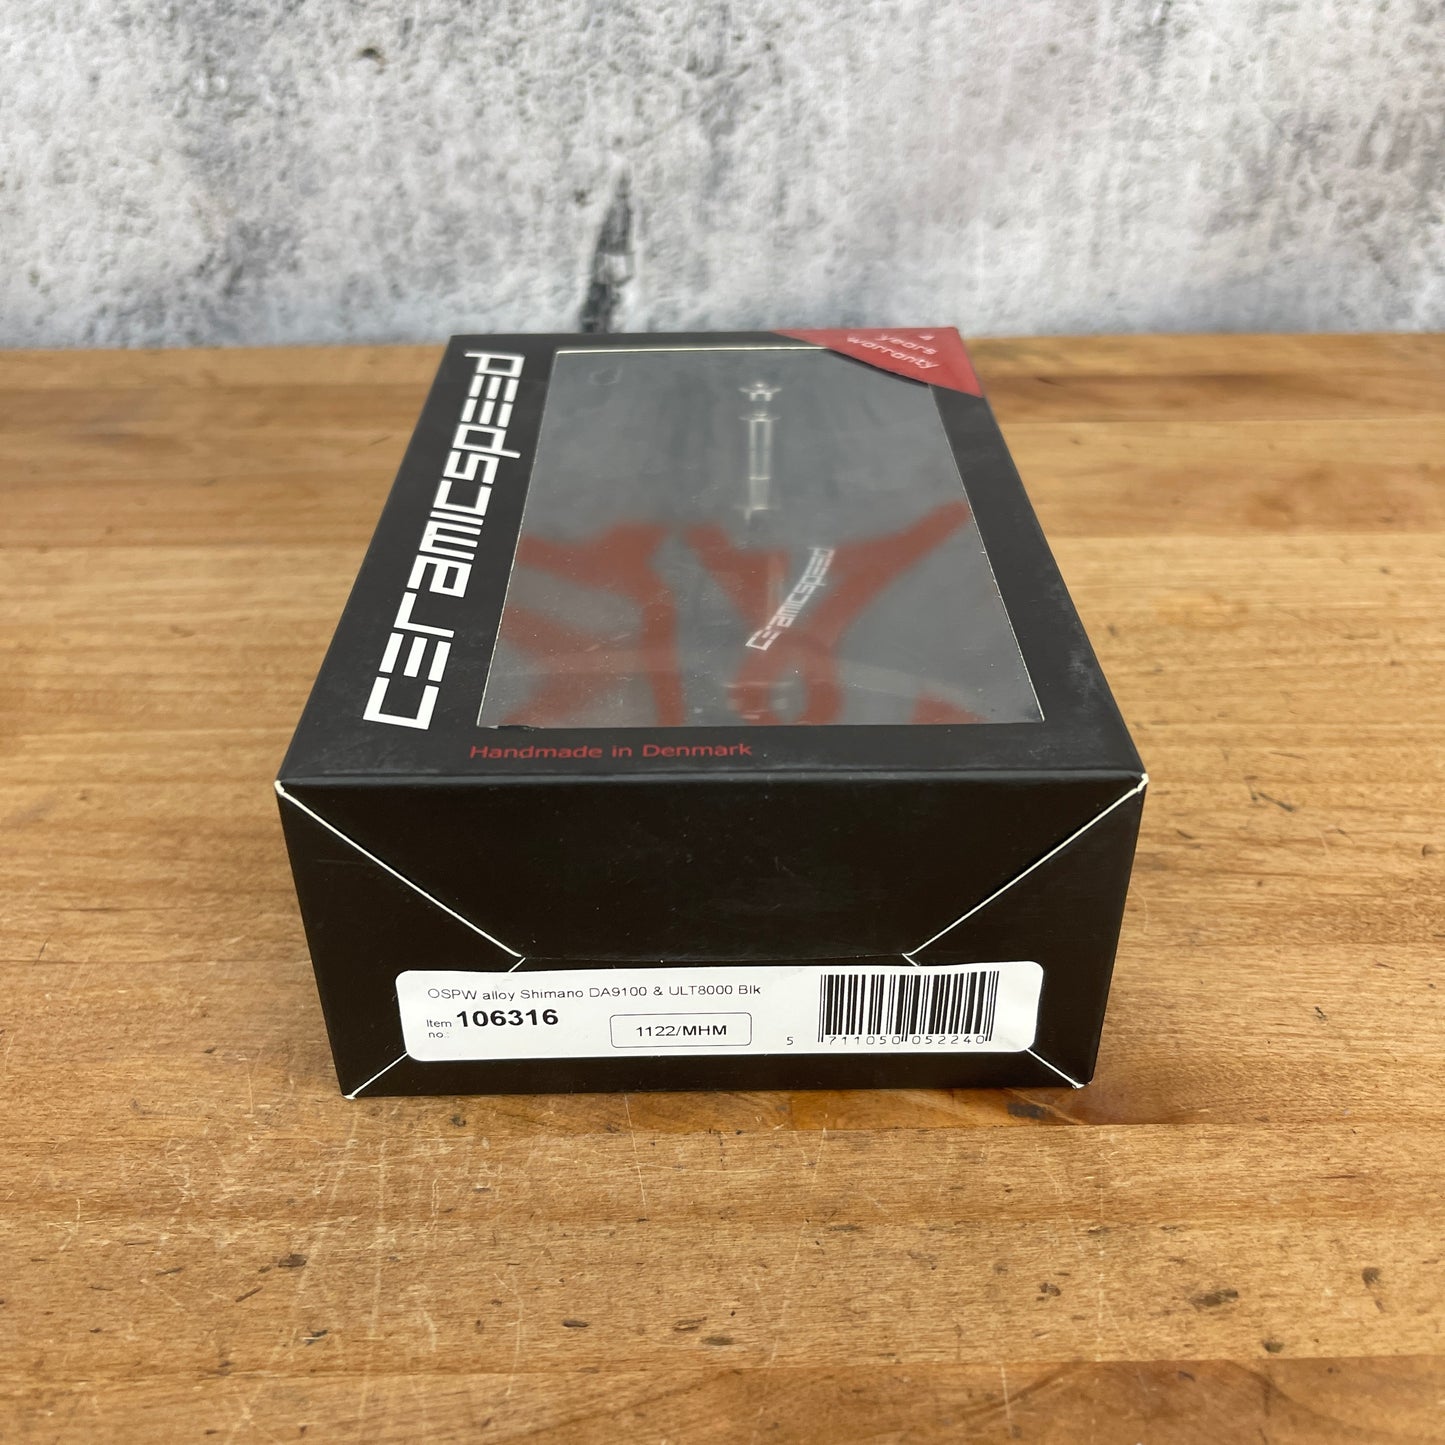 New! Ceramicspeed OSPW Cage for SRAM Mechanical Red Rear Derailleur 101663